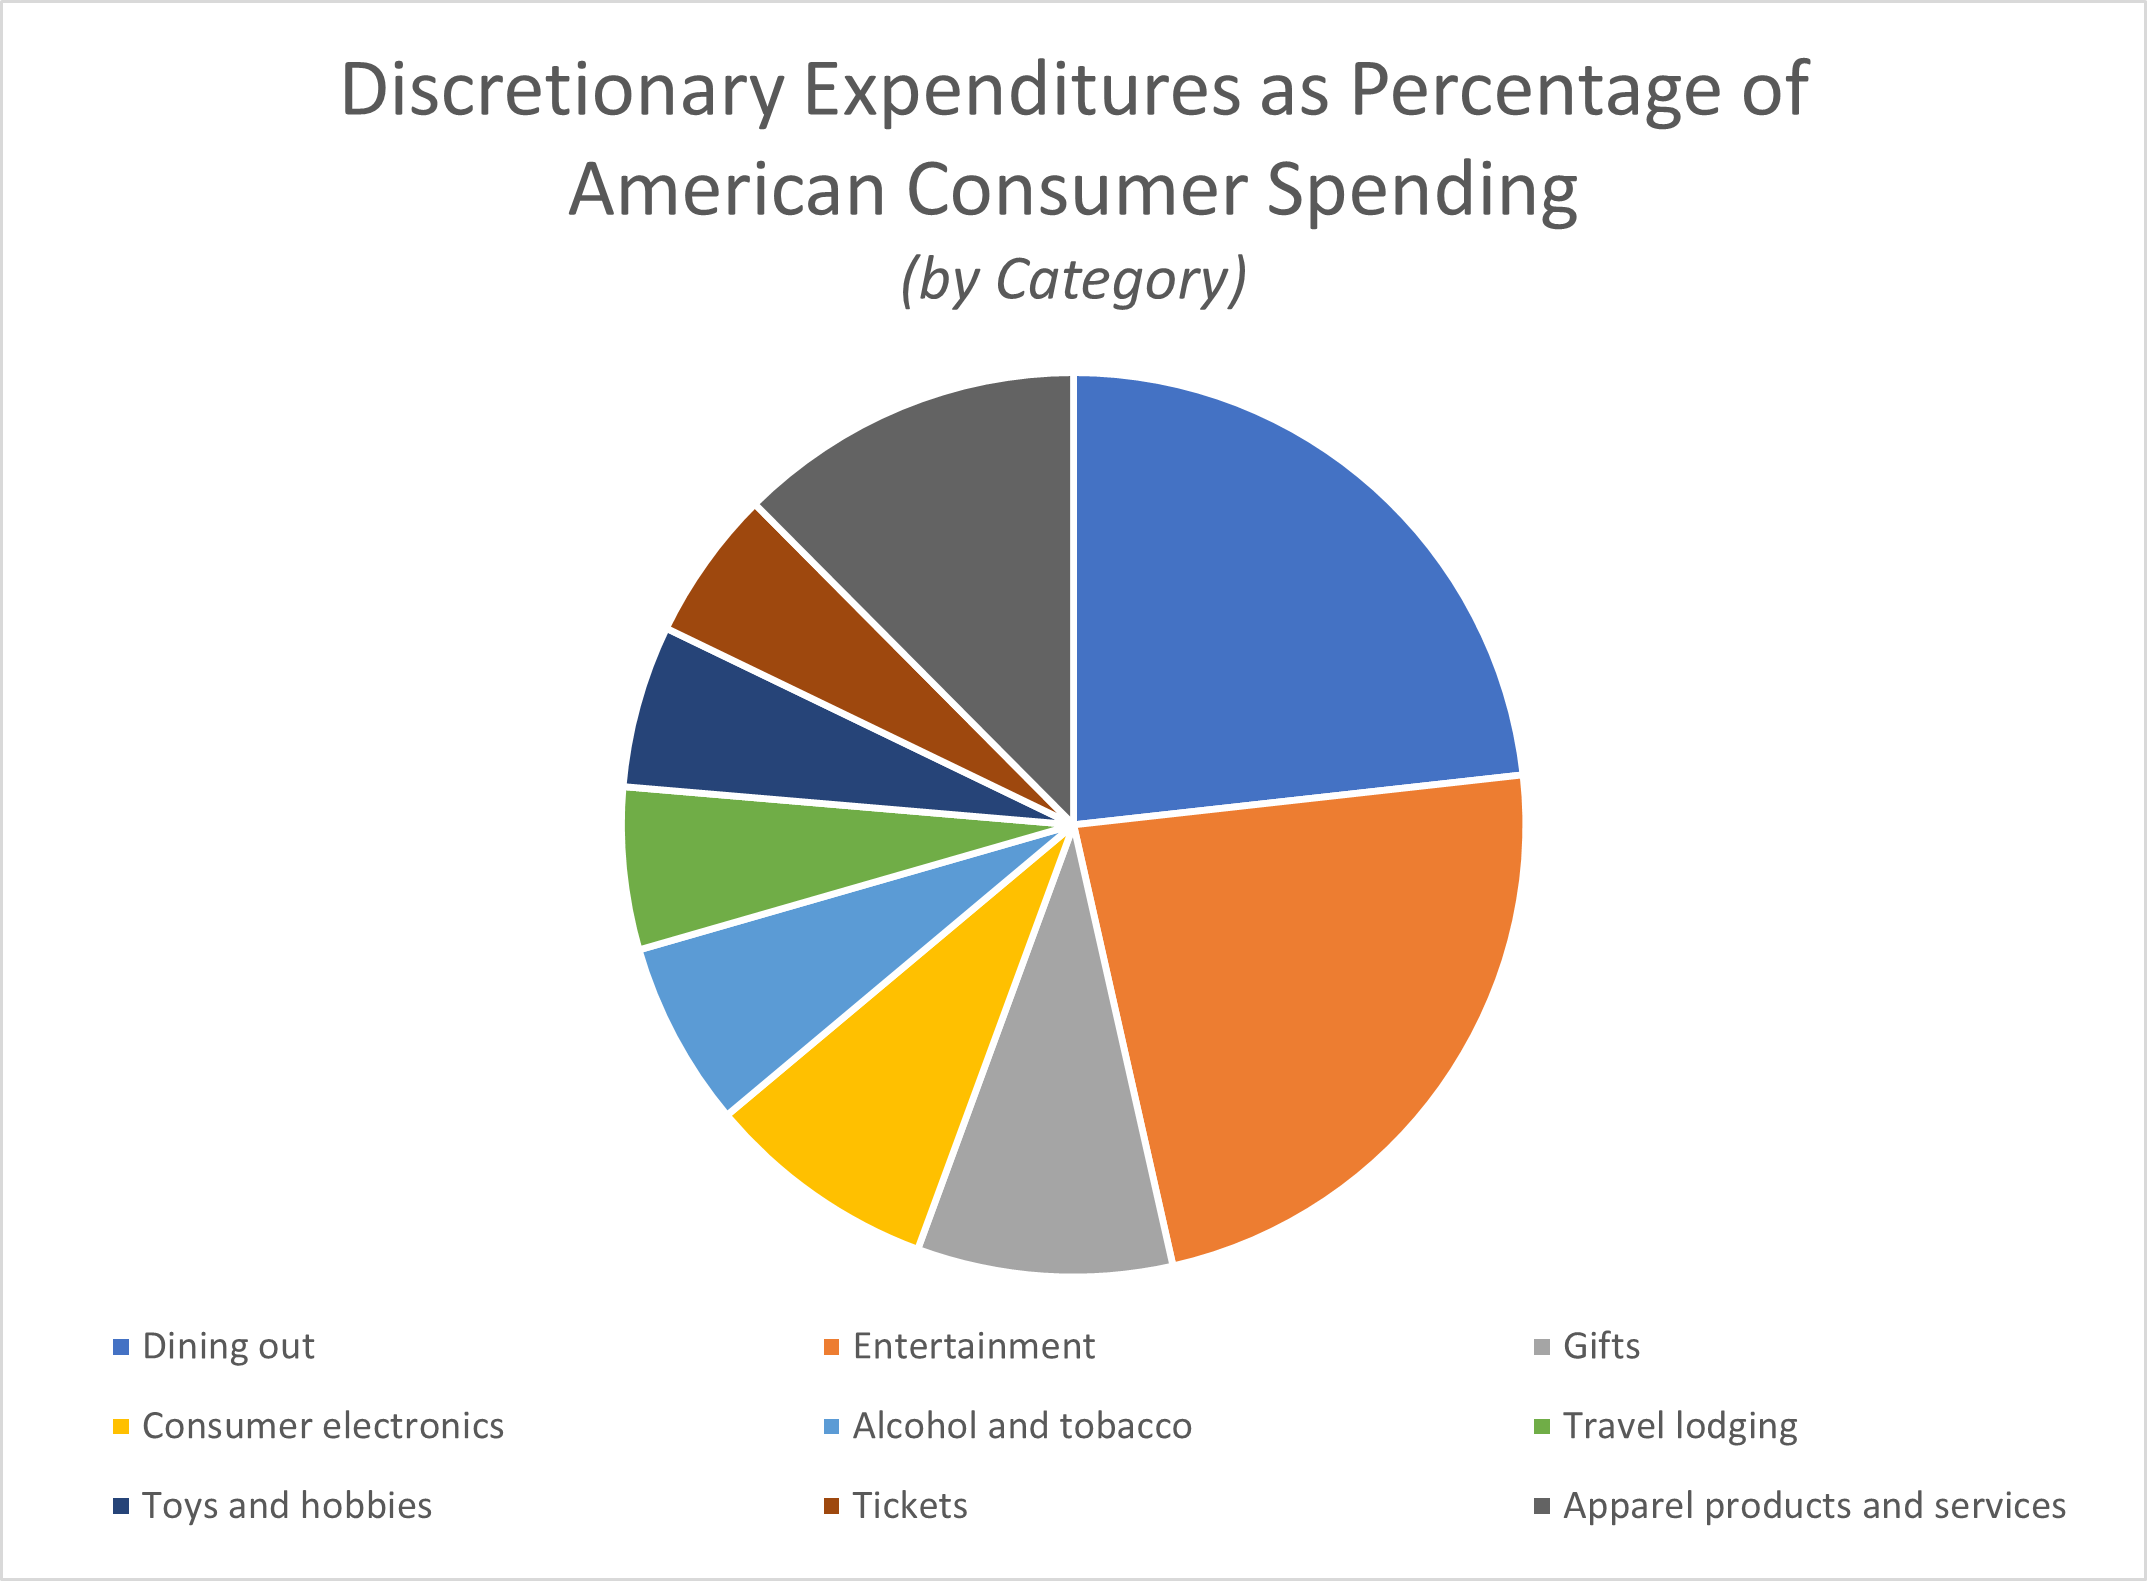 Pie chart illustrating the percentages of discretionary expenditures of American consumer spending